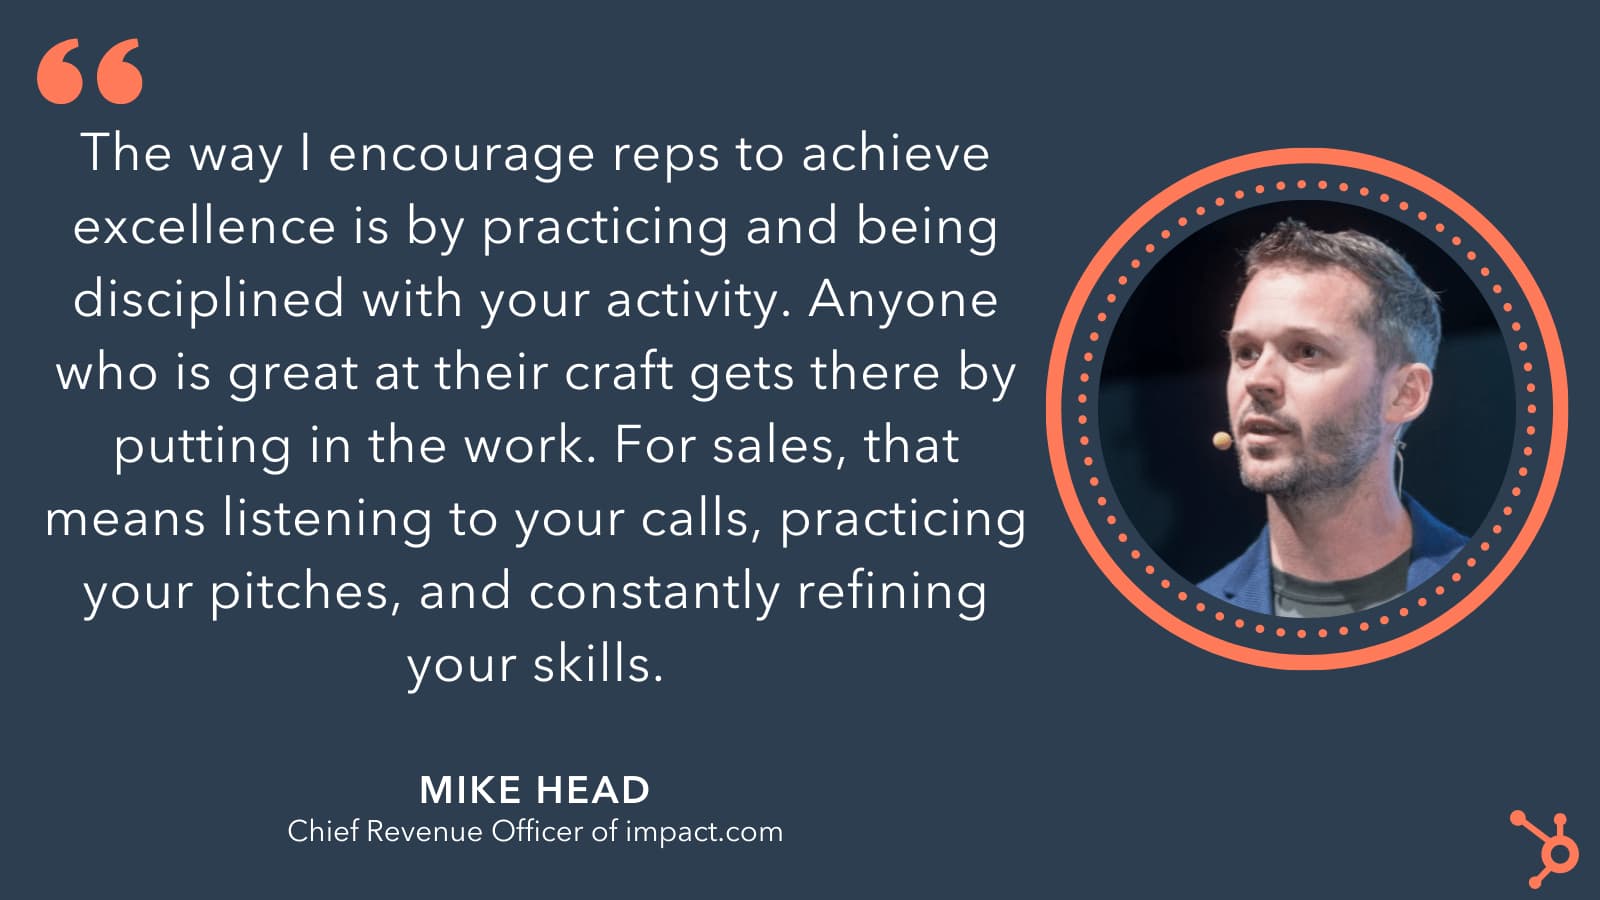 'The way I countrage repost to achieve excellence is by practicing and being disciplined with your activity. Anyone who is great at their craft gets there by putting in work. For sakes, that means listening to your calls, practicing your pitches, and constantly refining your skills,'Mike Head, chief revenue officer of impact.com.